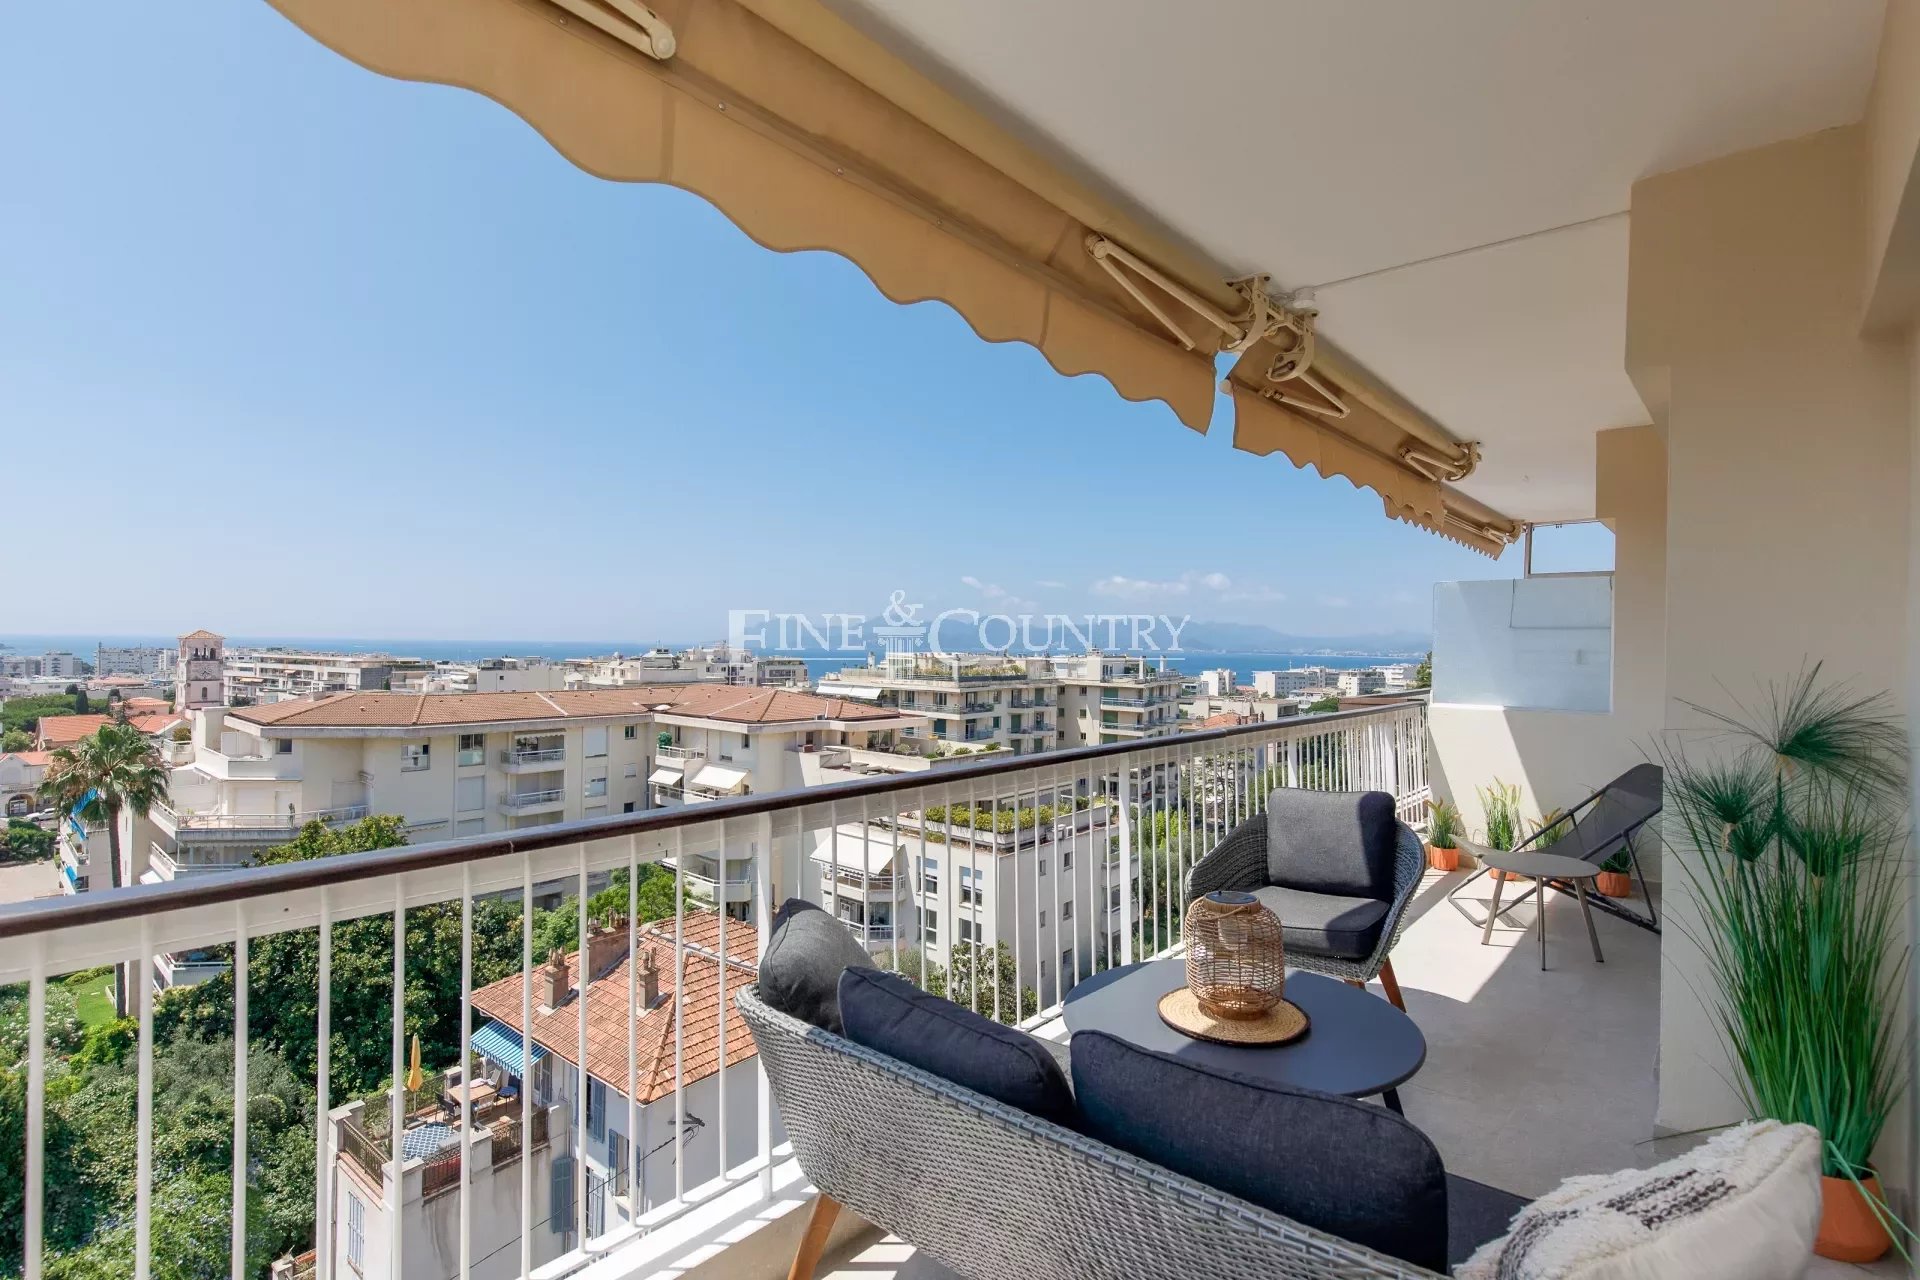 Sea View apartment for sale in Basse Californie, Cannes